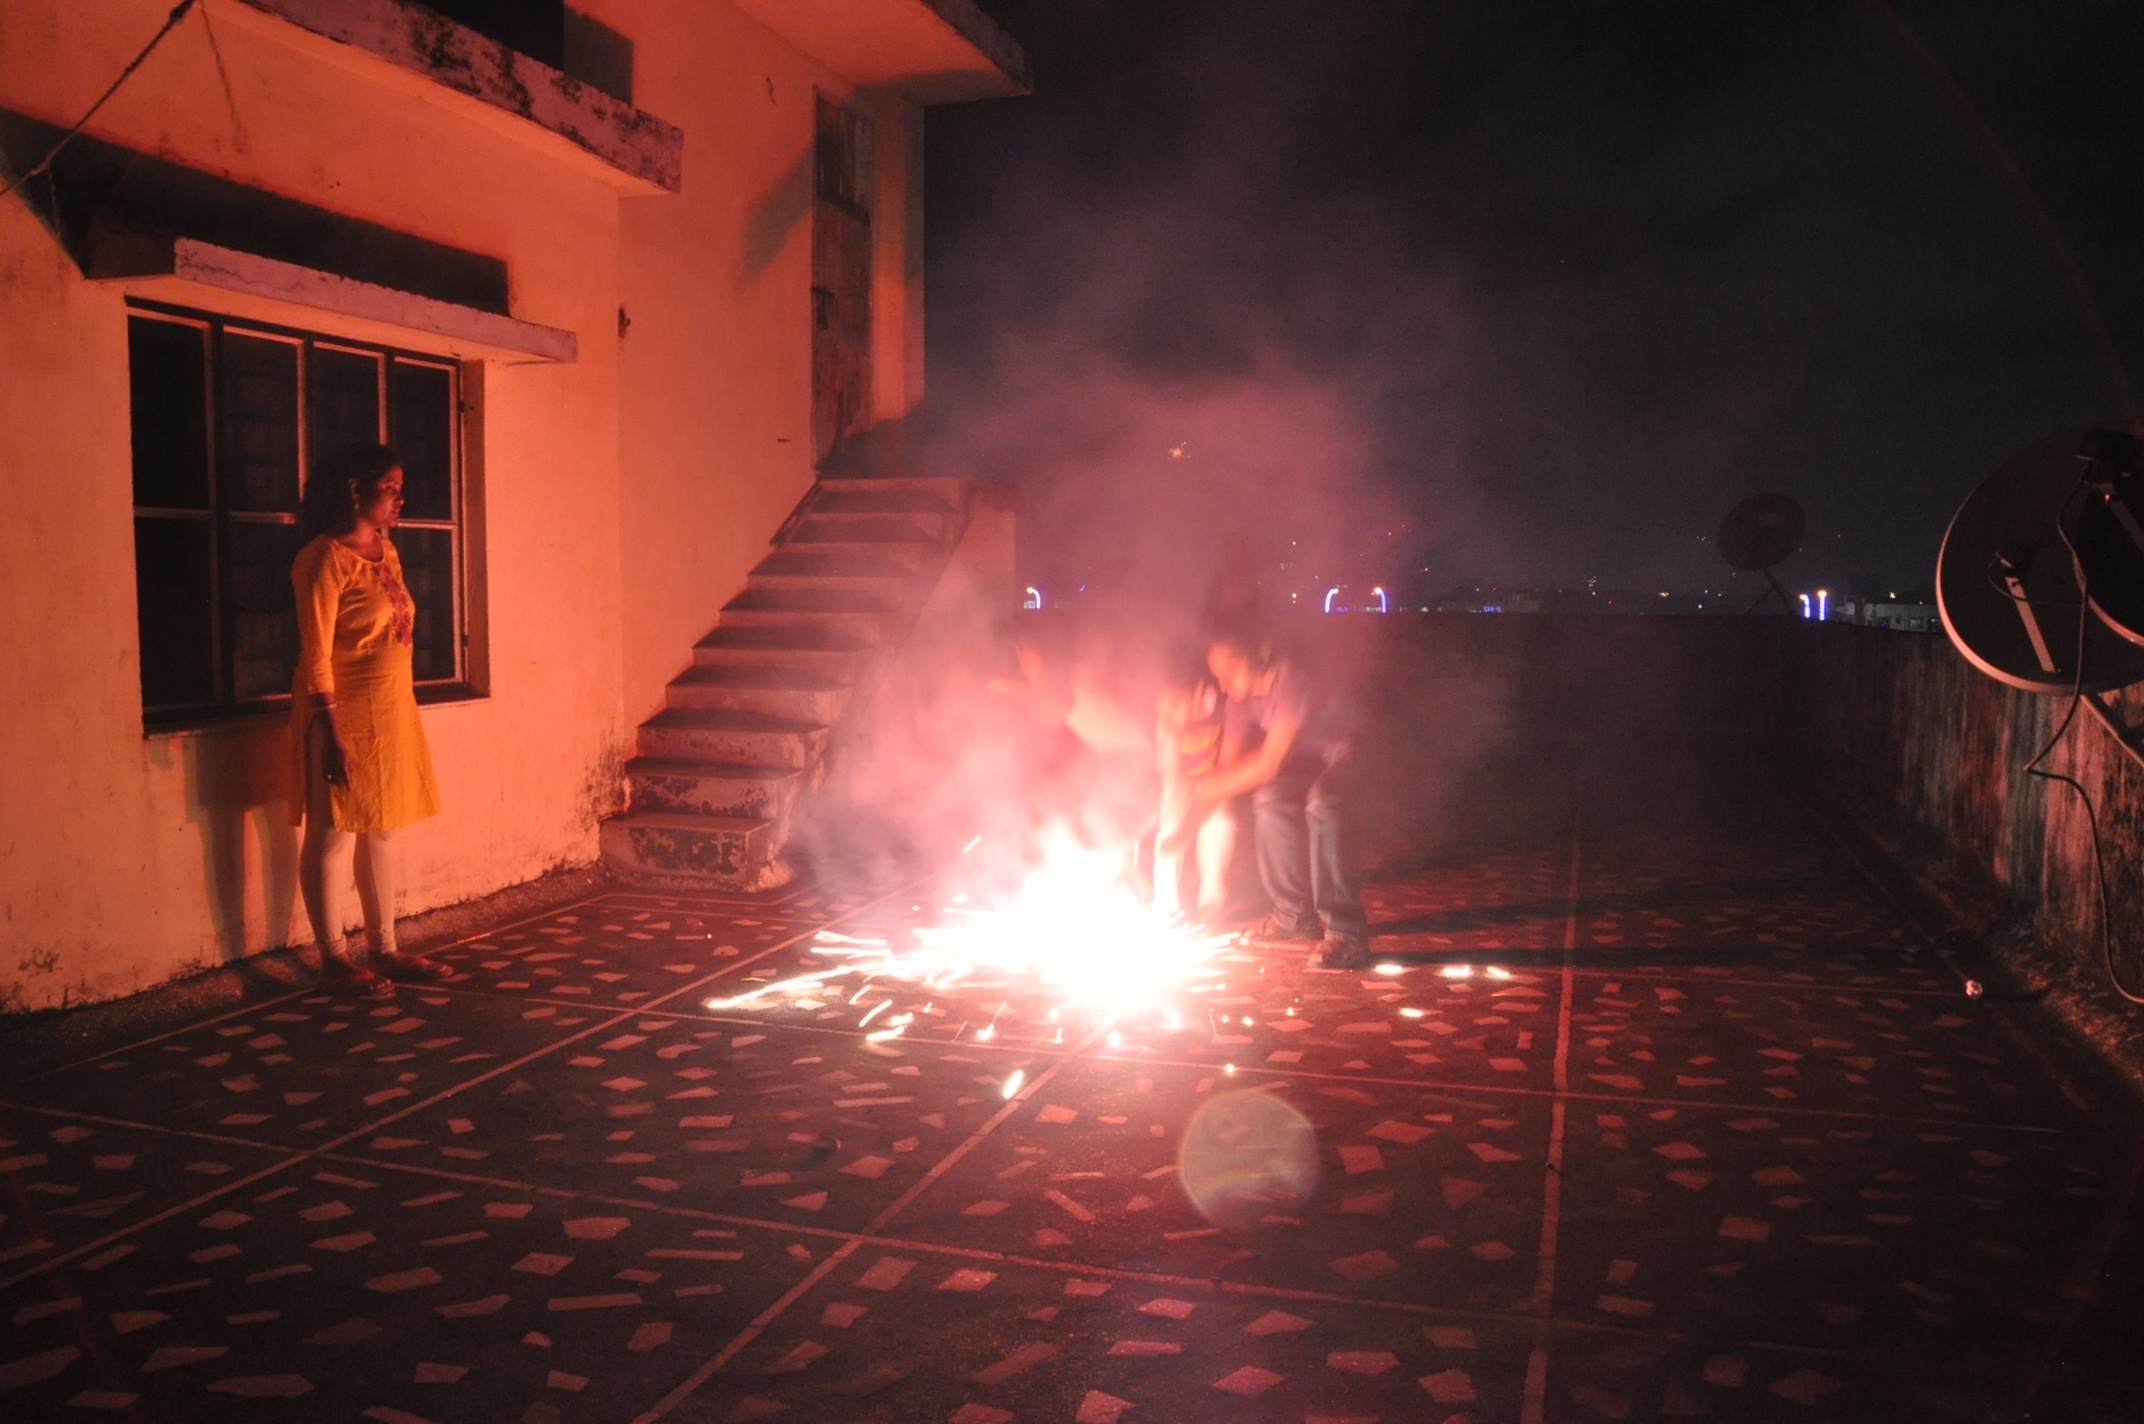 Children are seen lighting fireworks on a patio with the city lights in the background.